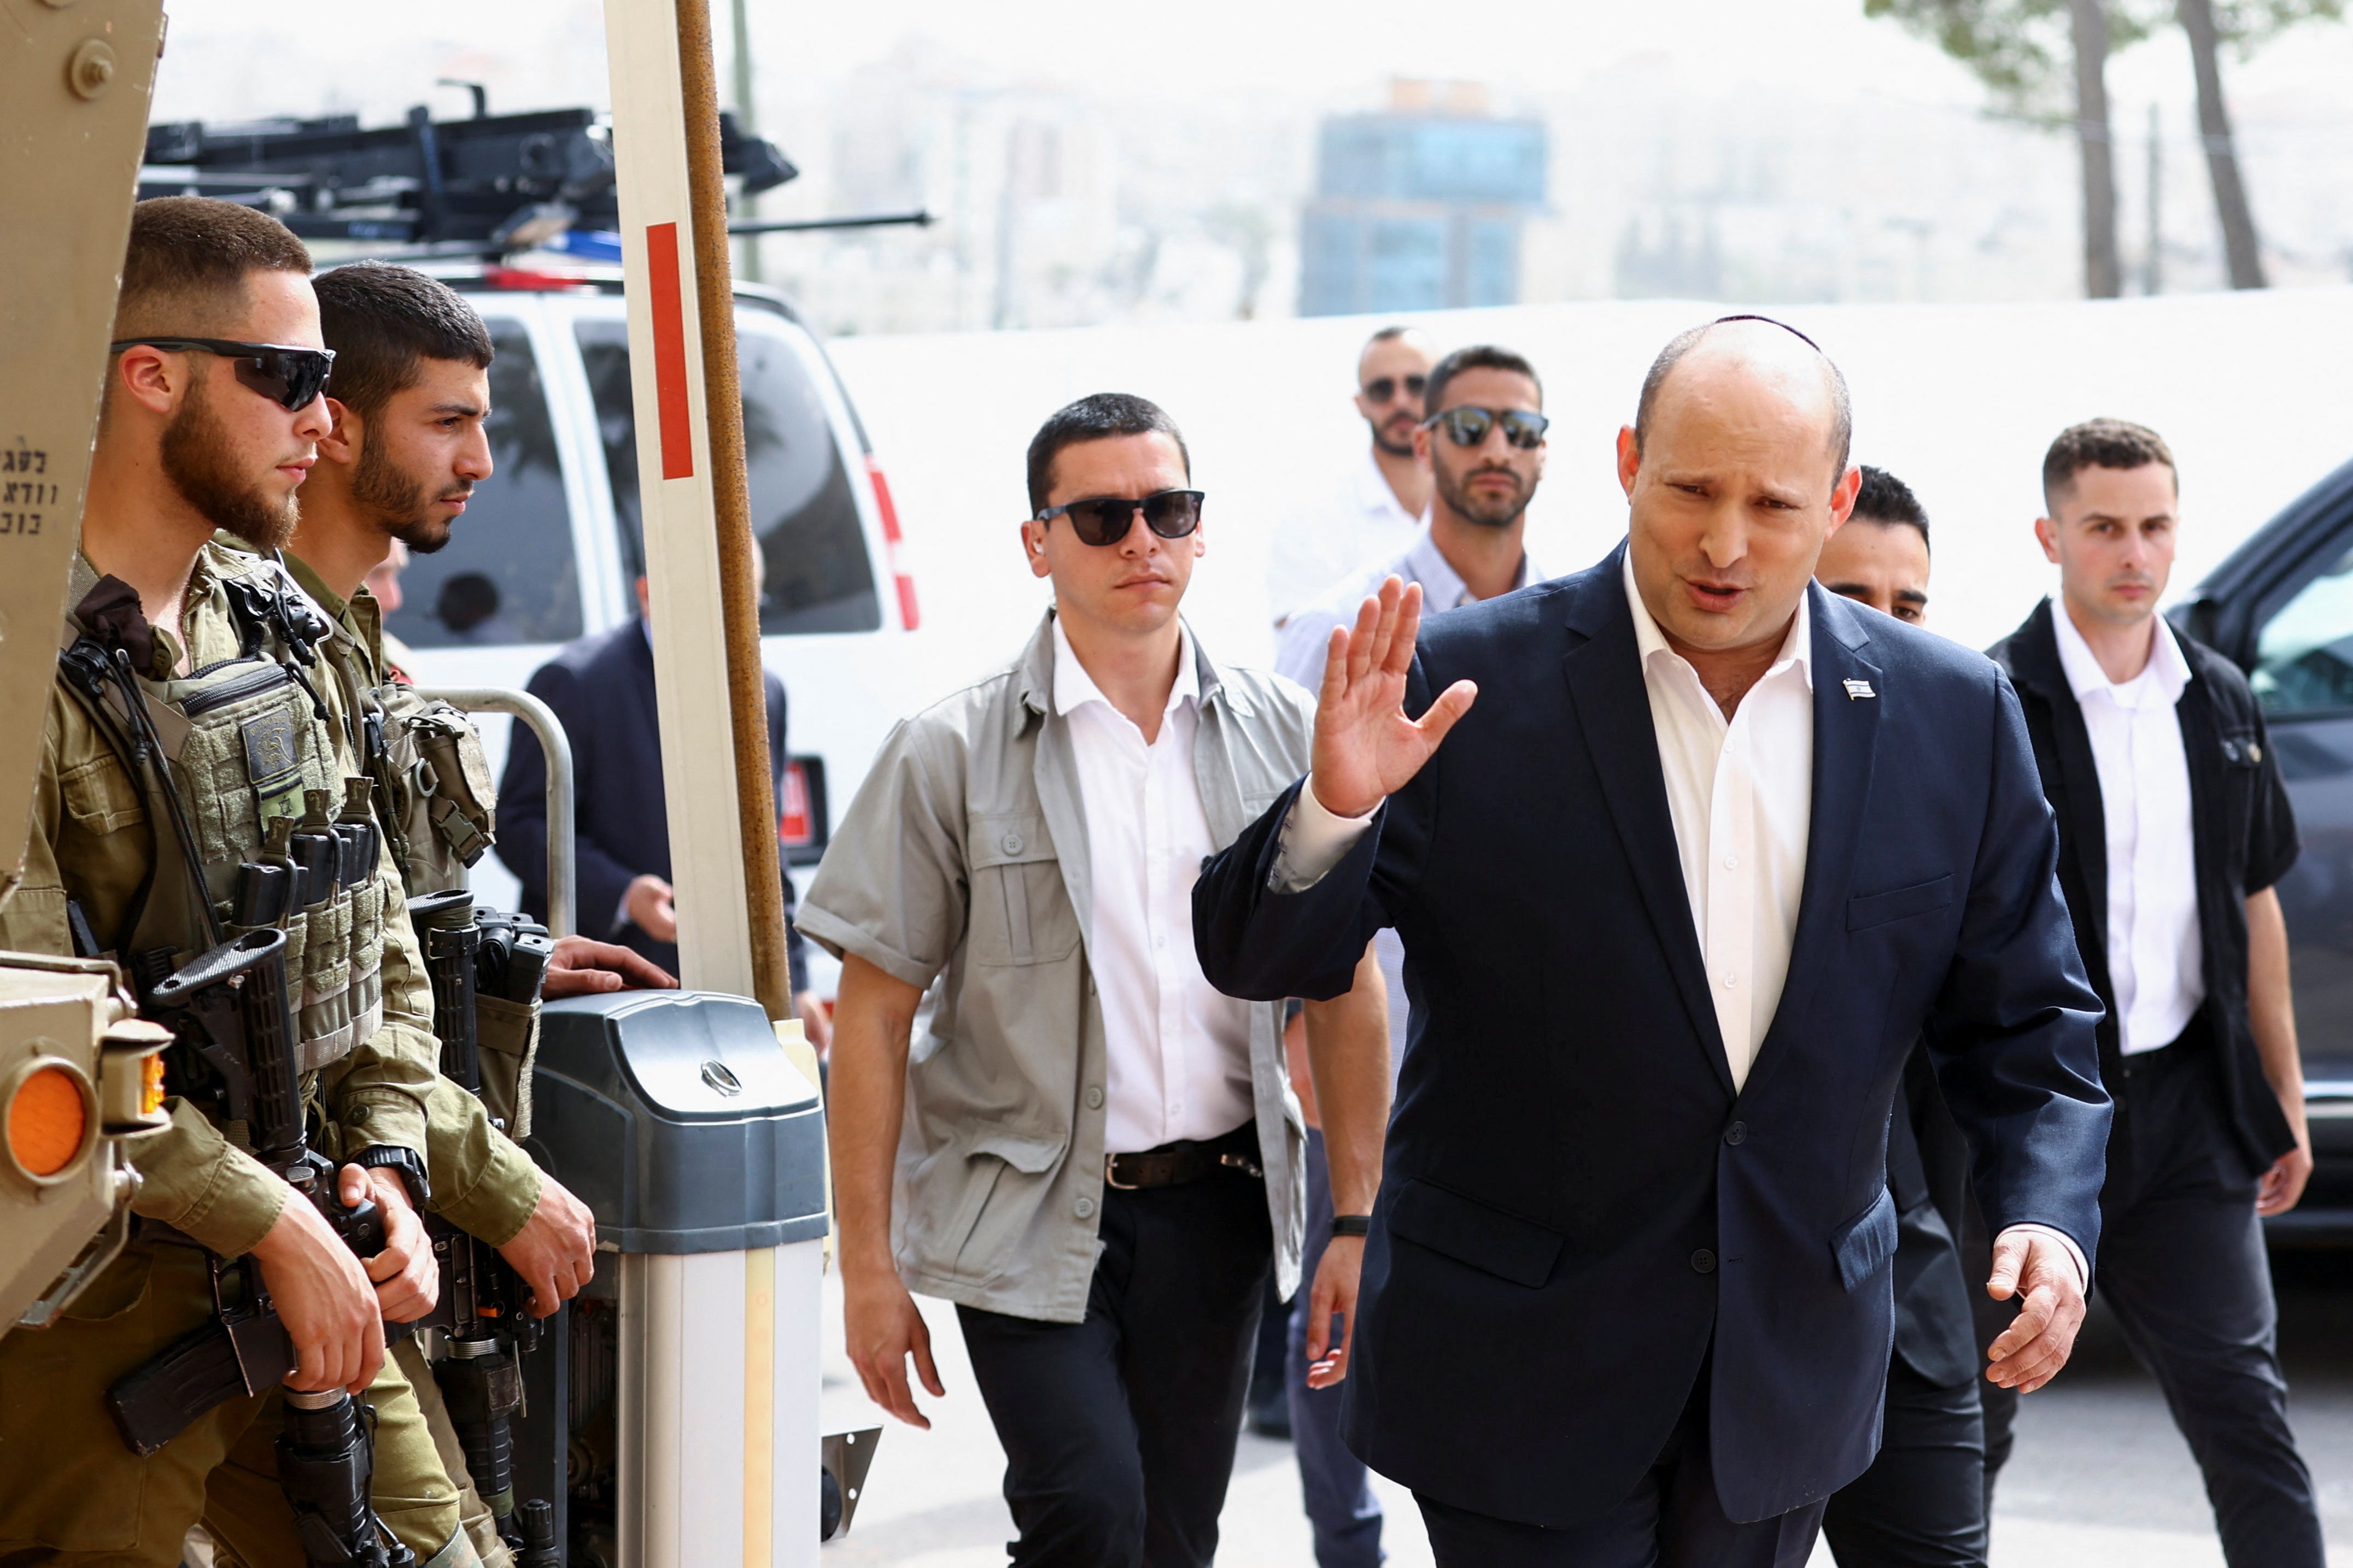 Israel’s prime minister Naftali Bennett gestures during a visit to an army base in the Jewish settlement of Beit El, near Ramallah, in the Israeli-occupied West Bank, 5 April 2022